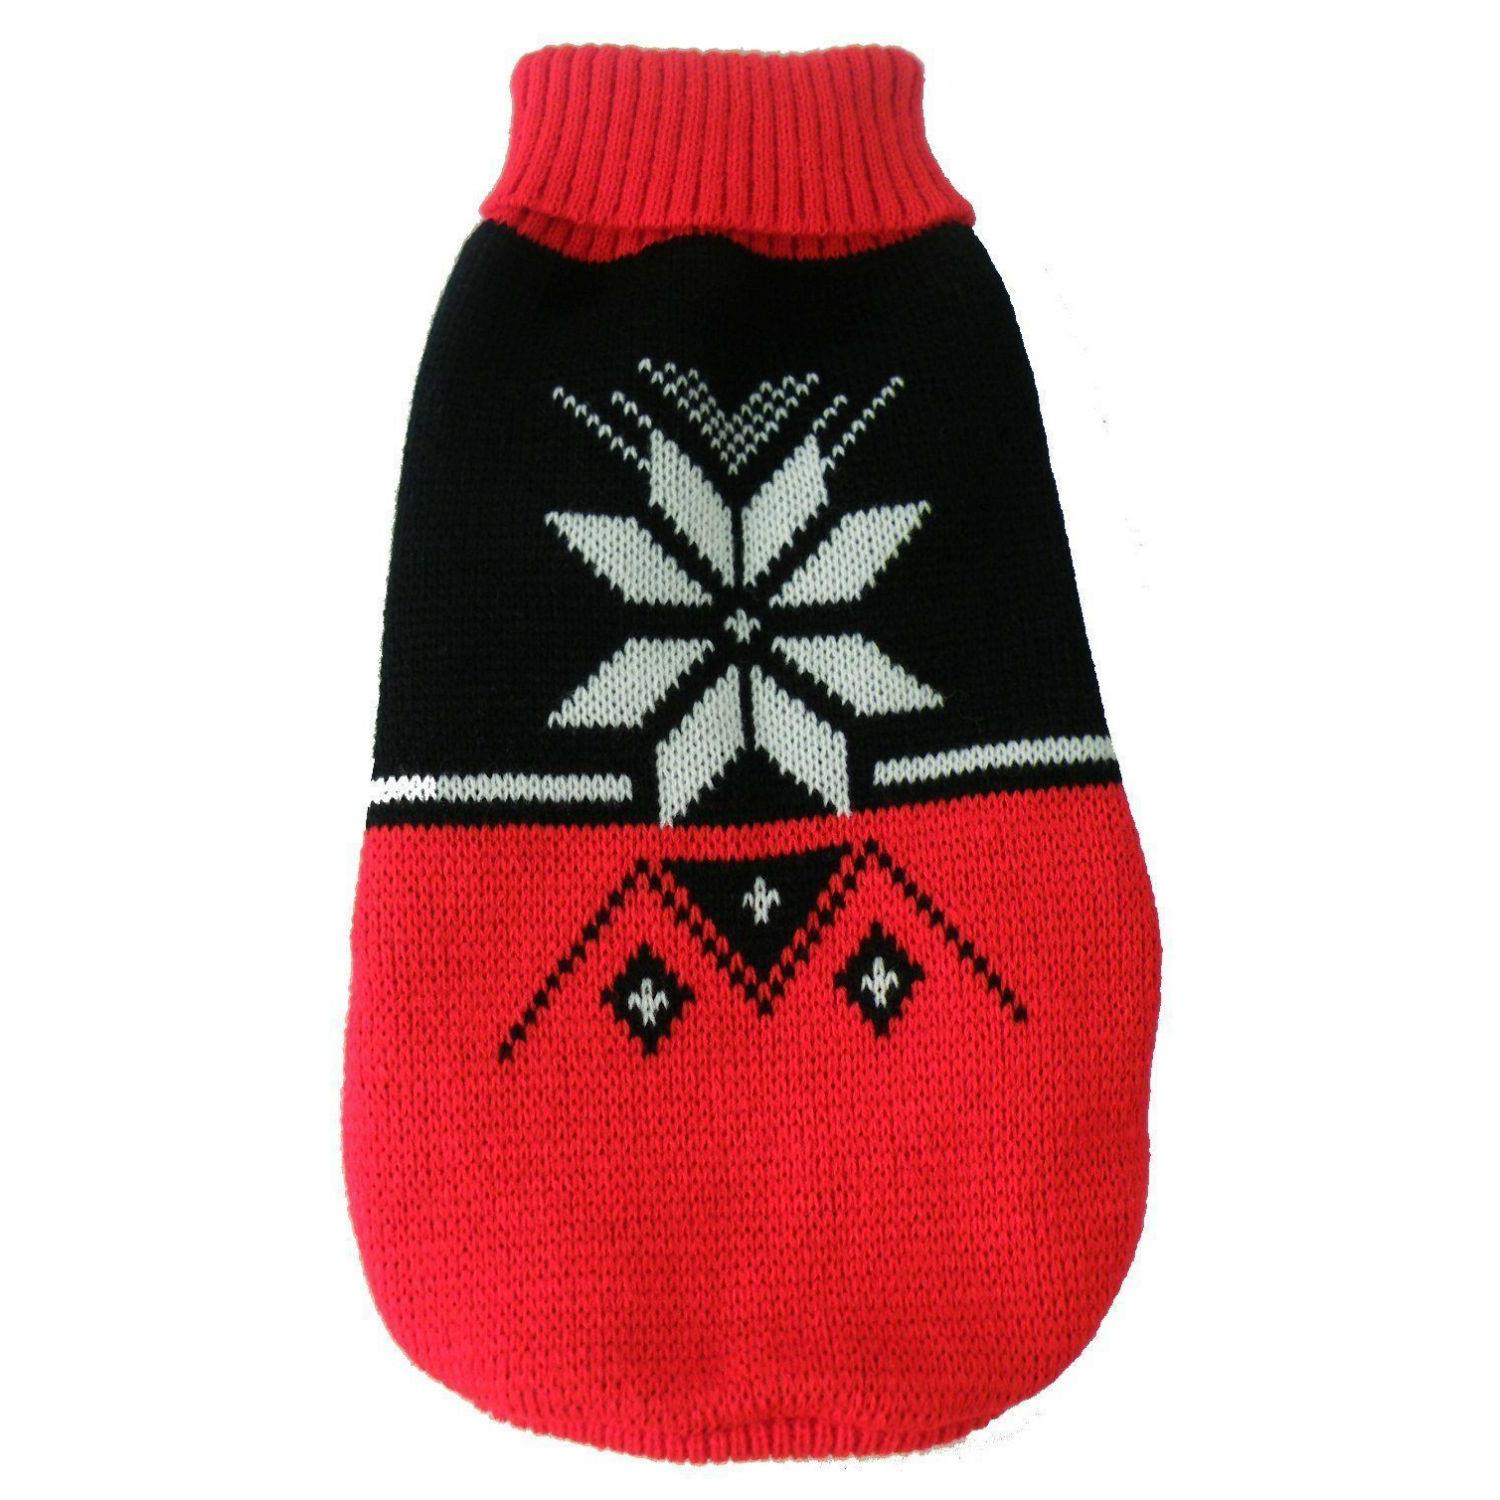 Pet Life Snow Flake Cable-Knit Ribbed Turtleneck Dog Sweater - Red and Black